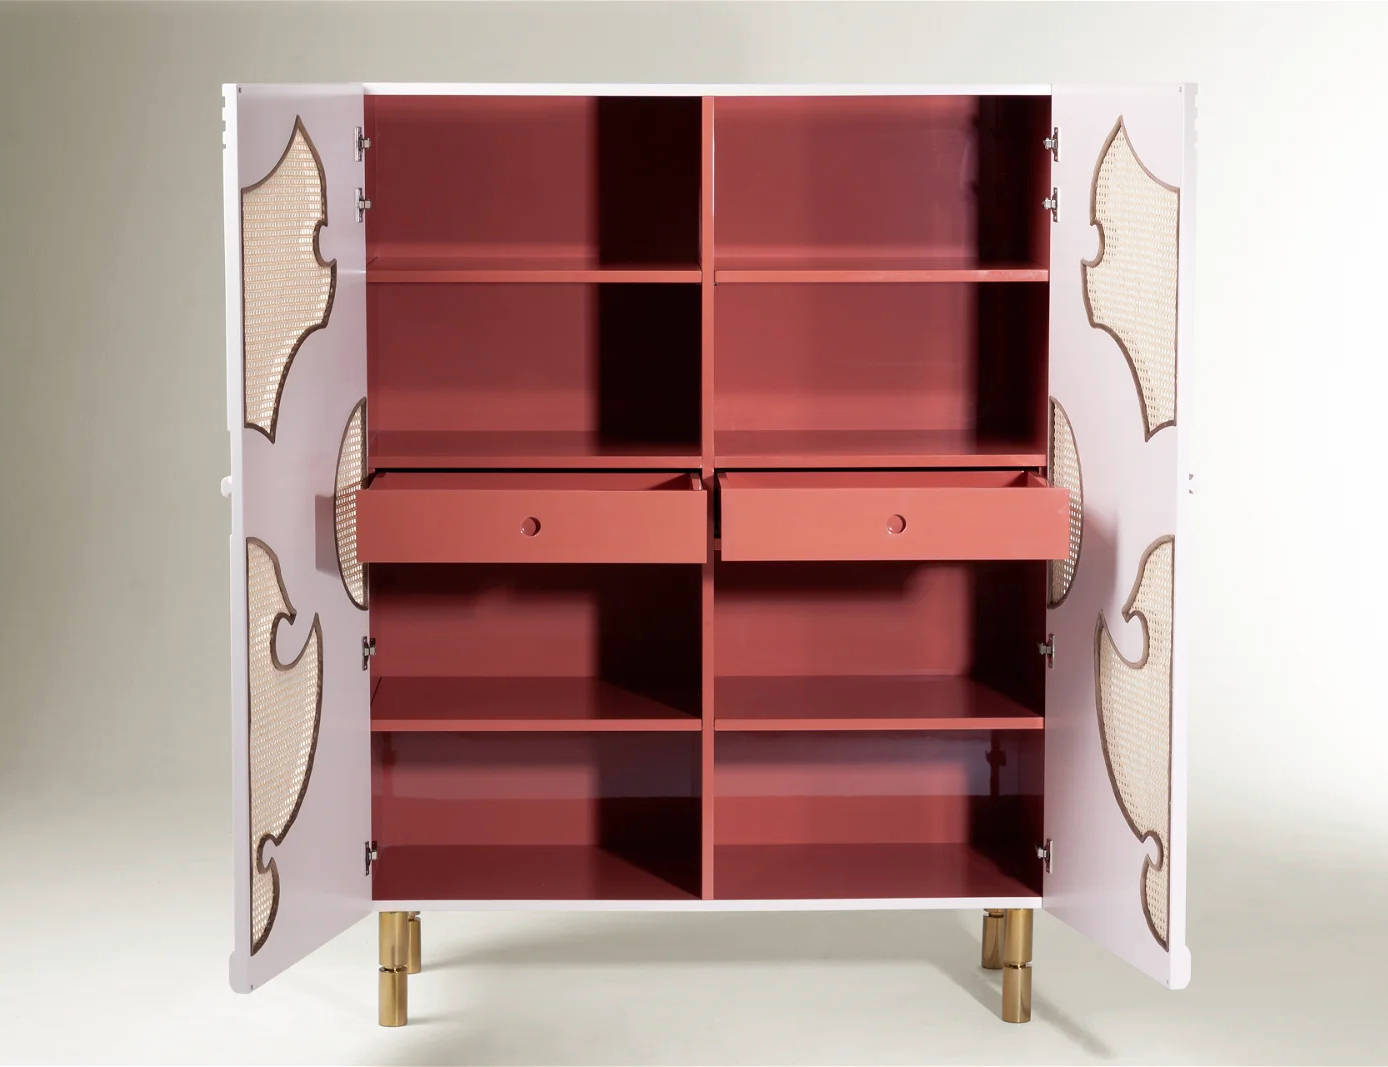 Inside of bar cabinet with contrasting colors to the exterior